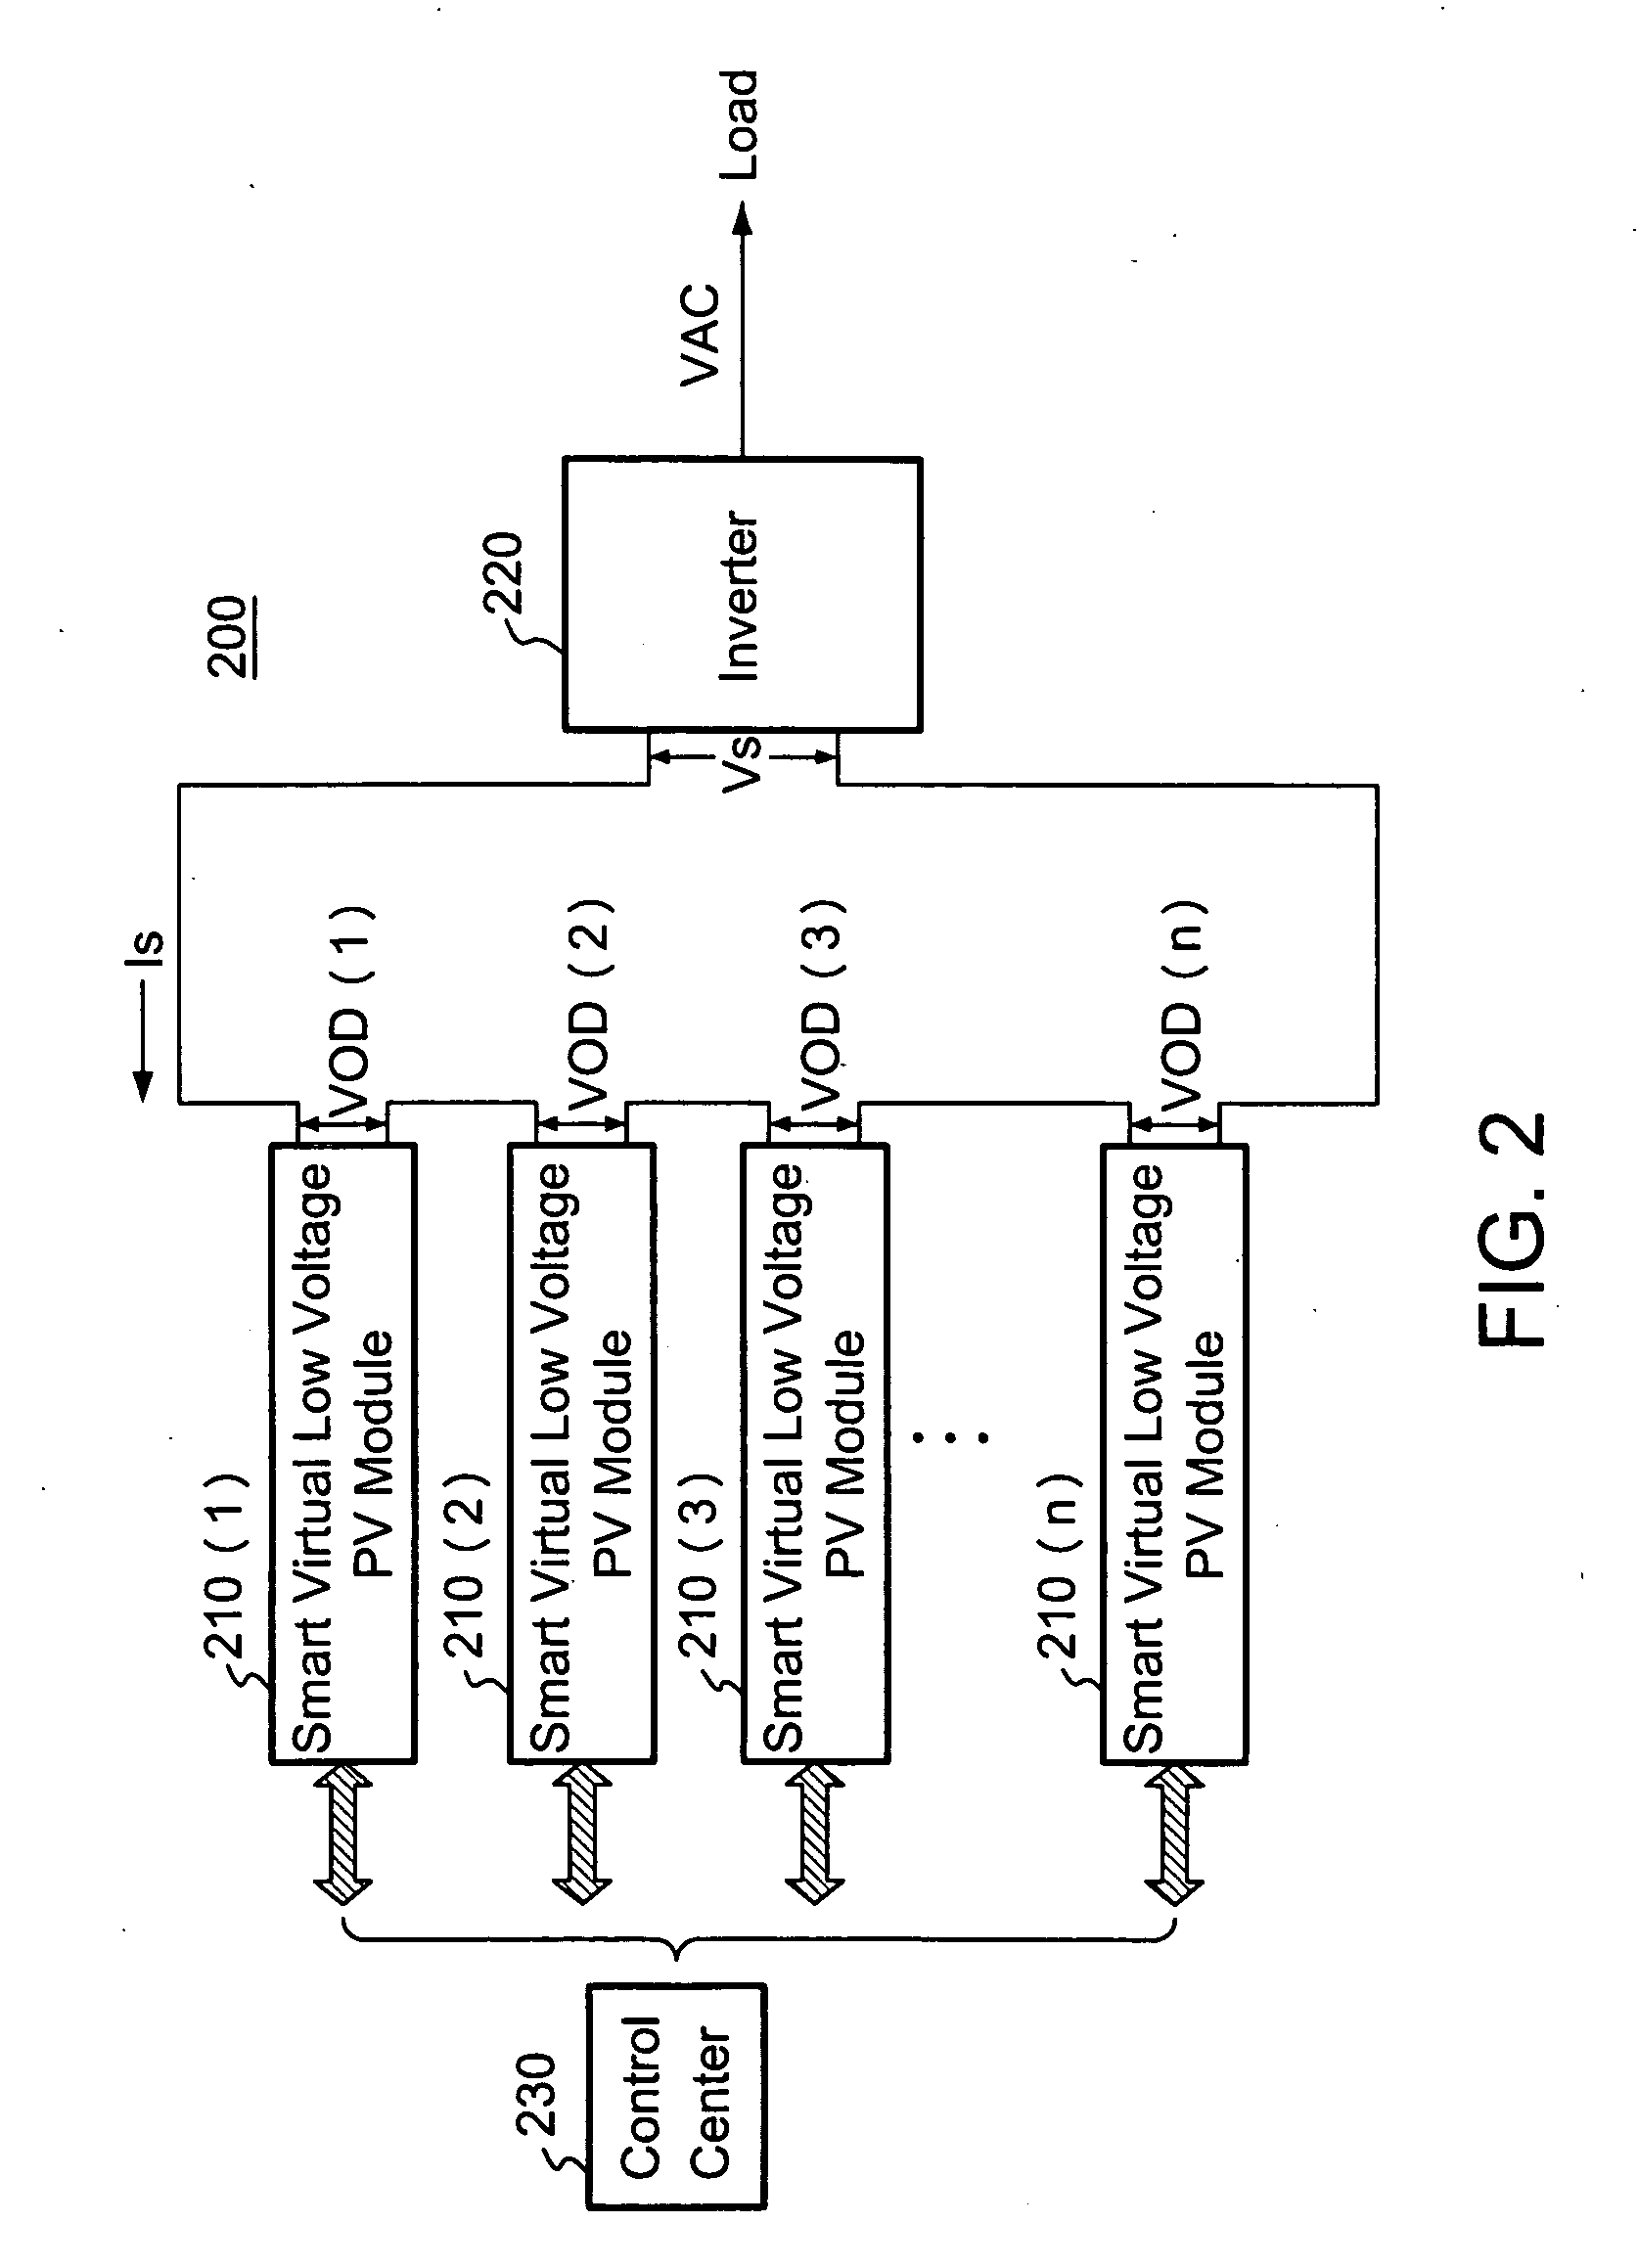 Smart virtual low voltage photovoltaic module and photovoltaic power system employing the same